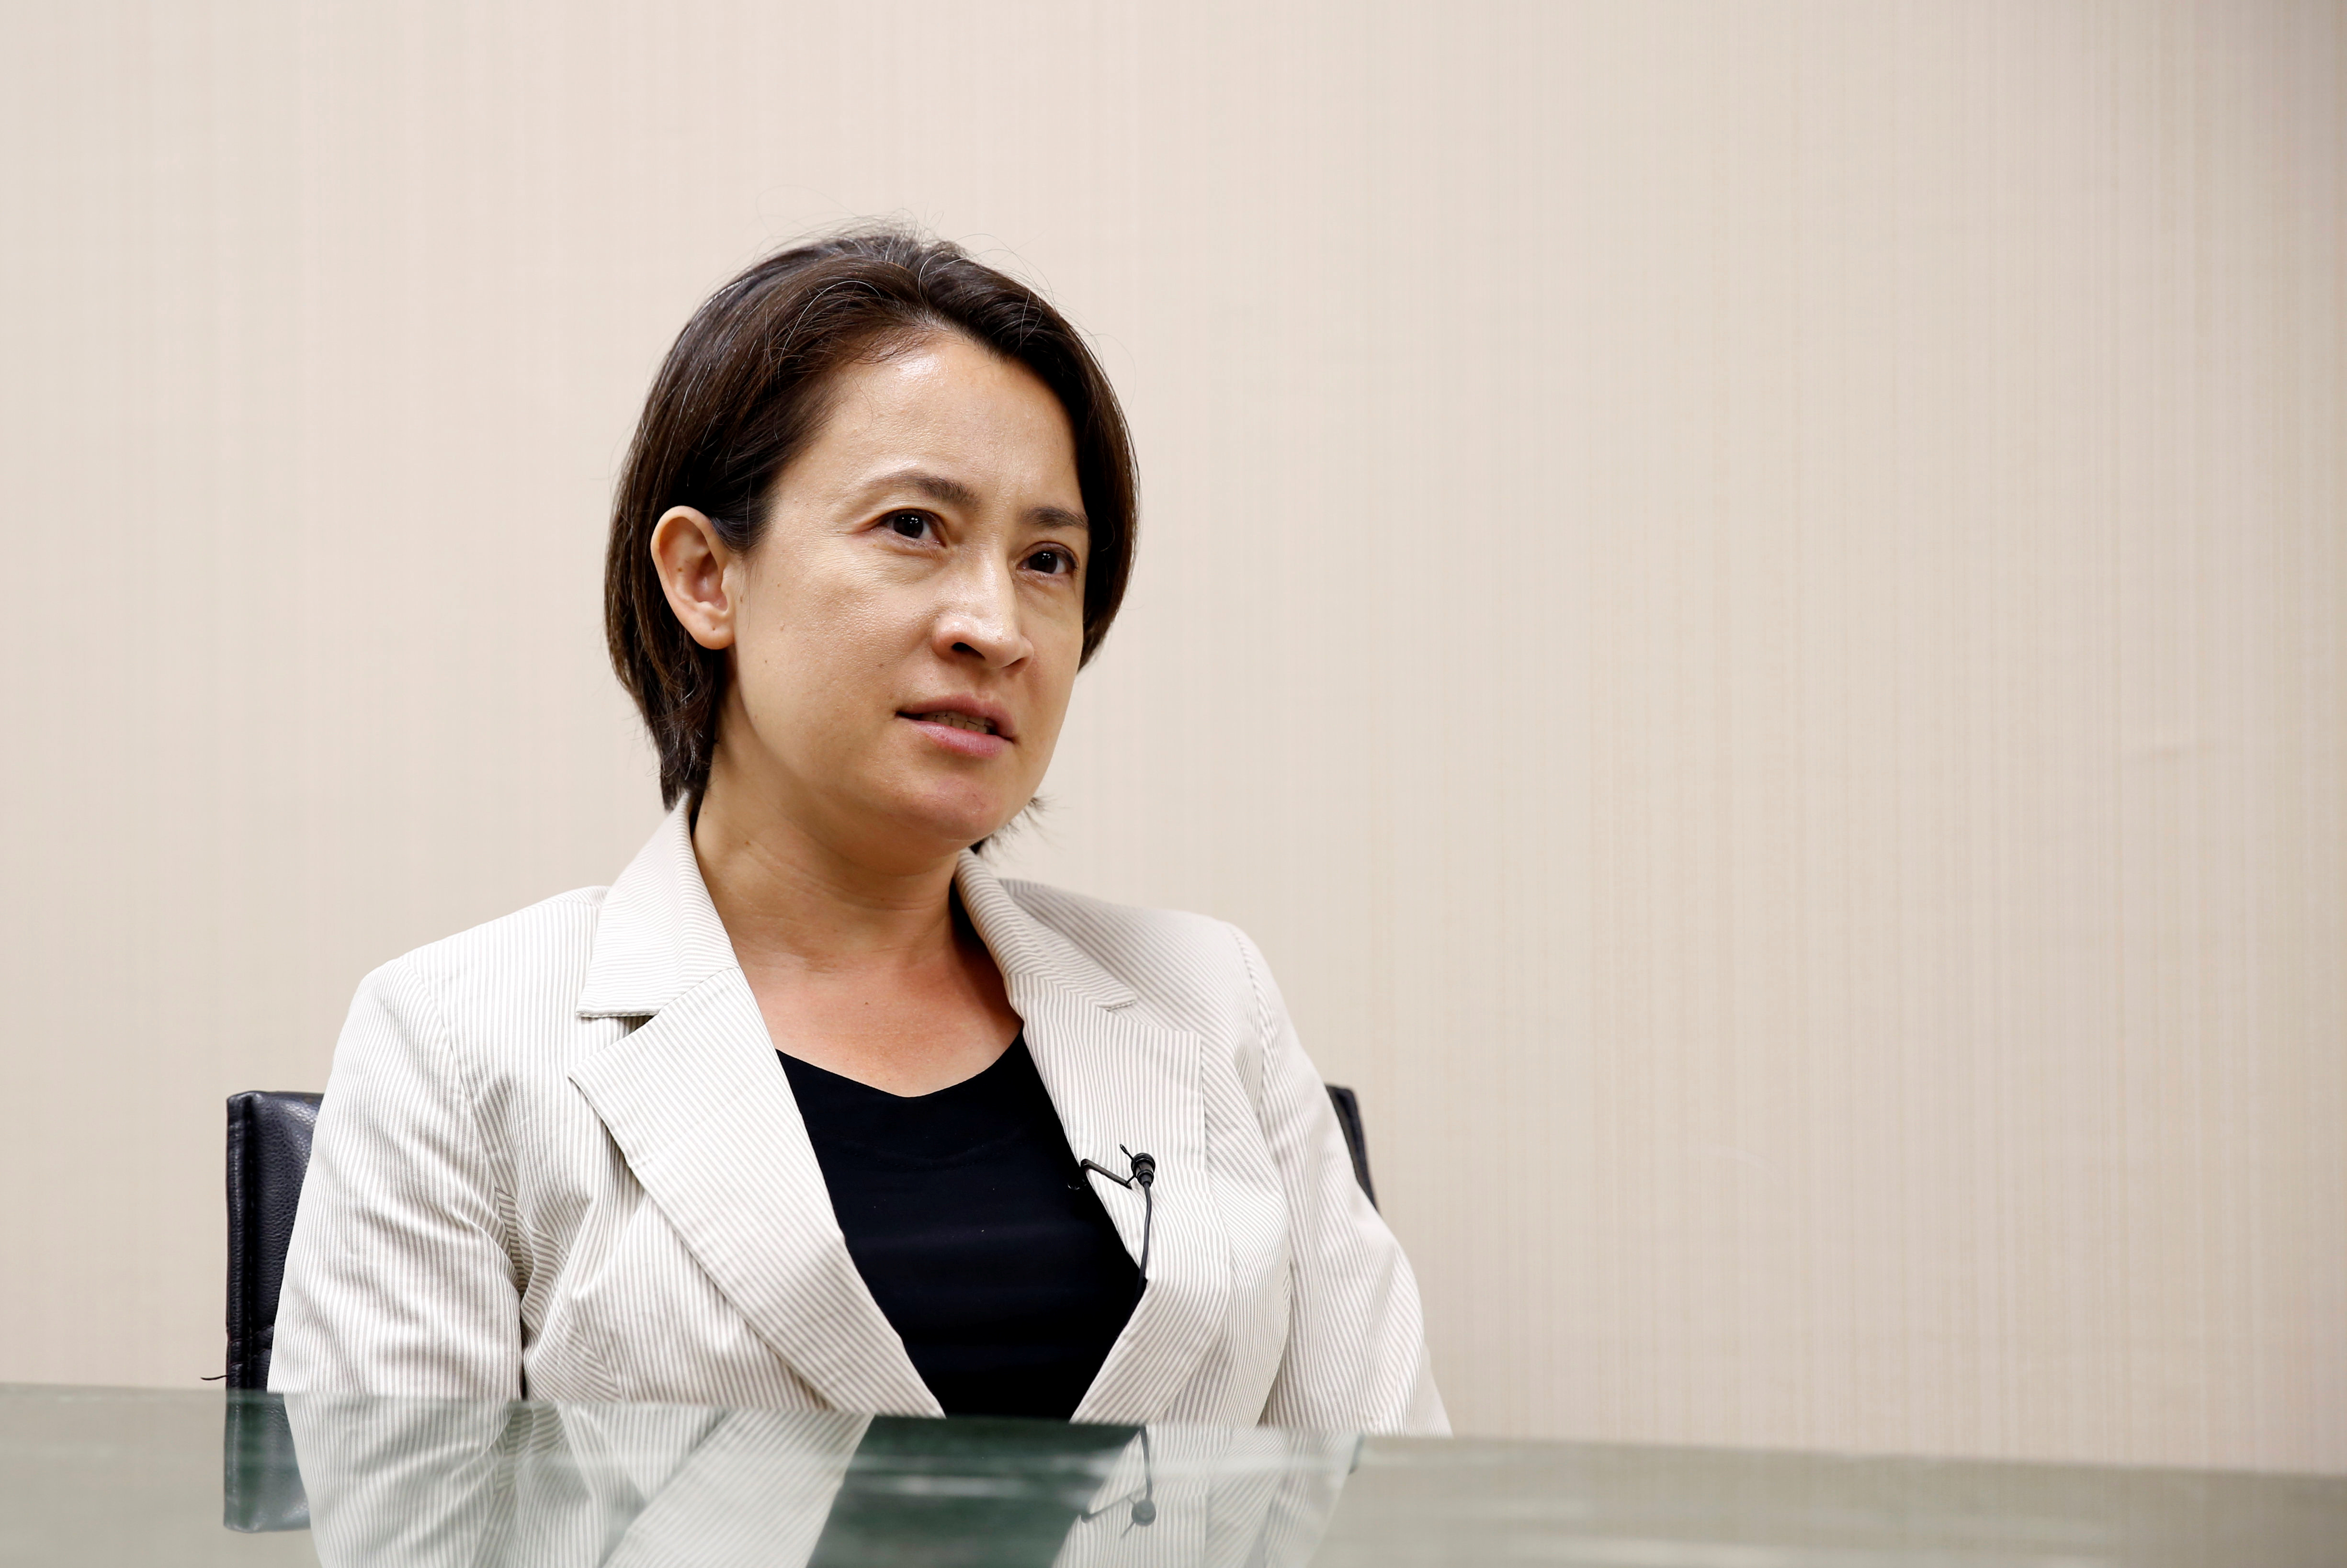 Hsiao Bi-khim, a lawmaker from Taiwan's ruling Democratic Progressive Party, speaks during an interview in Taipei